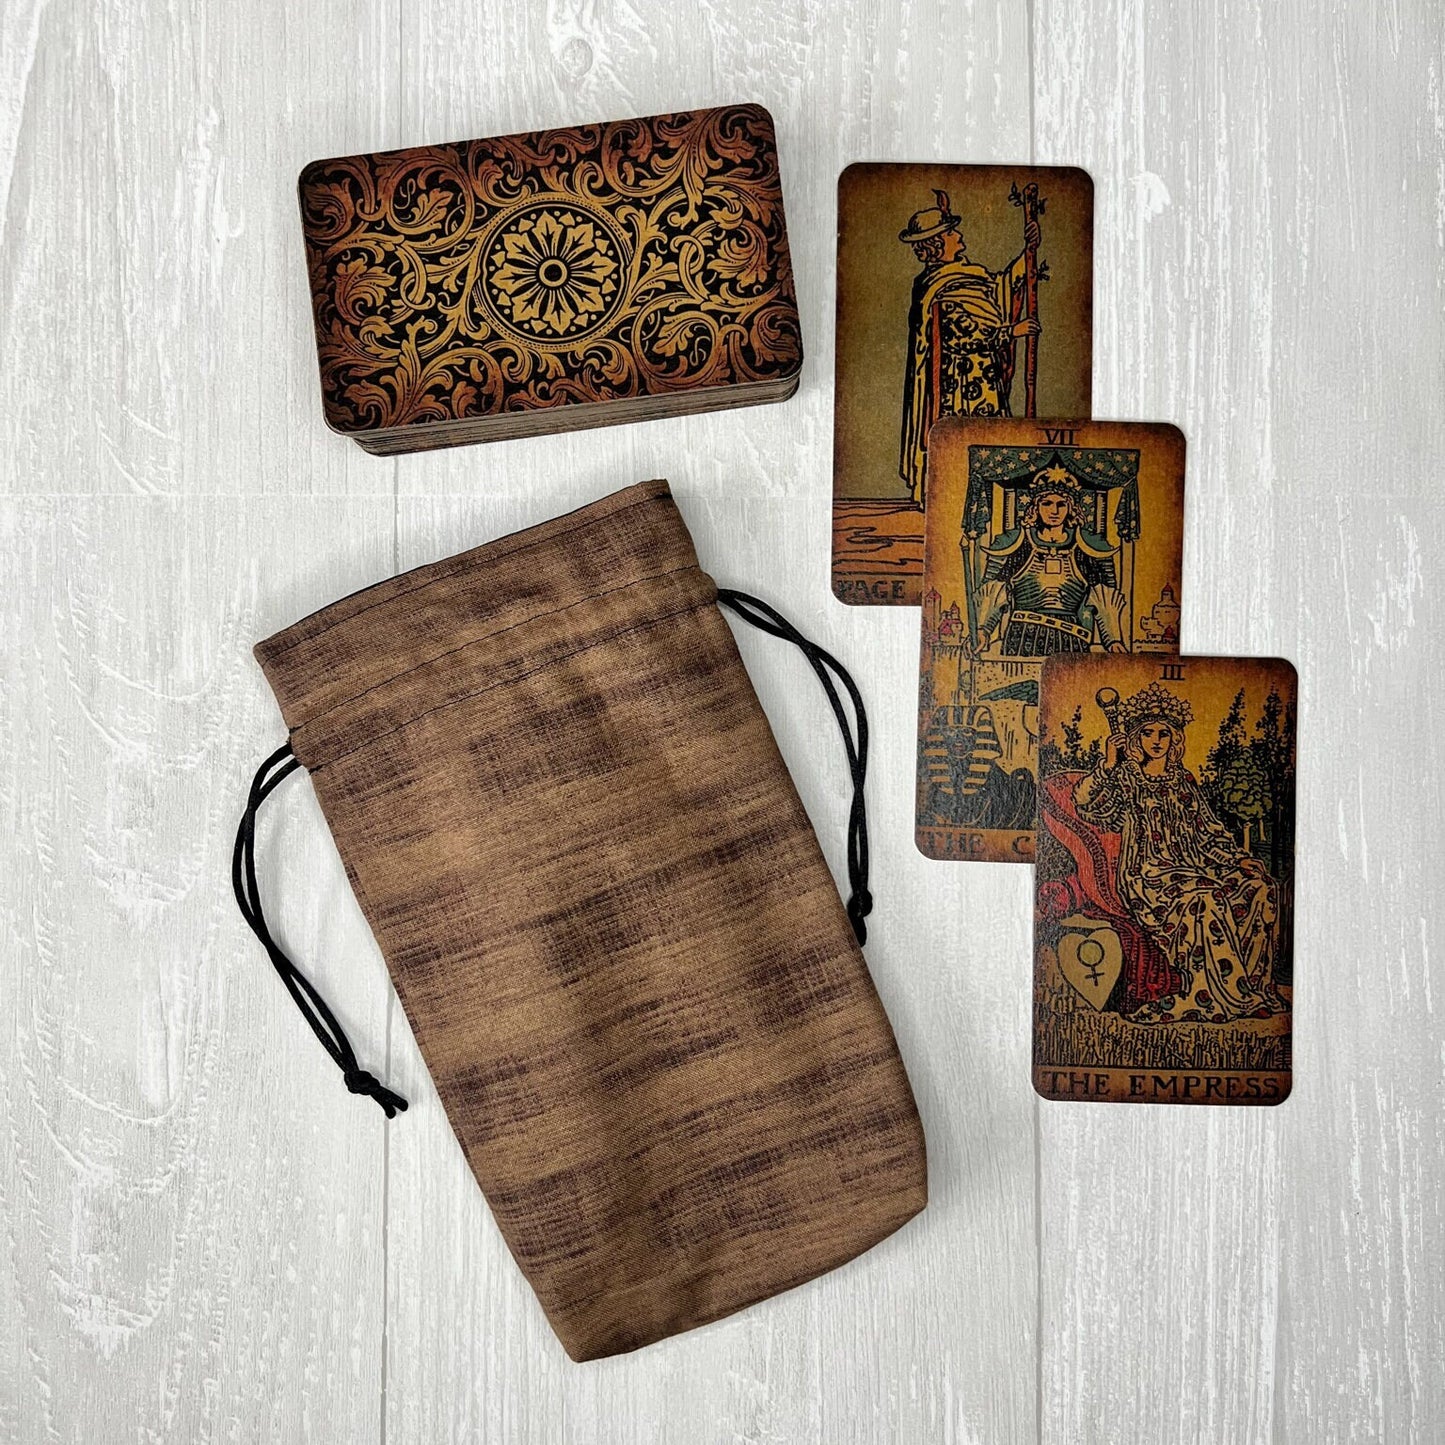 Brown Tarot Bag, Drawstring Pouch, Tarot Deck Storage Holder, Standard Tarot Case, Pagan Witchcraft Wiccan Divination Tools Gifts & Supplies